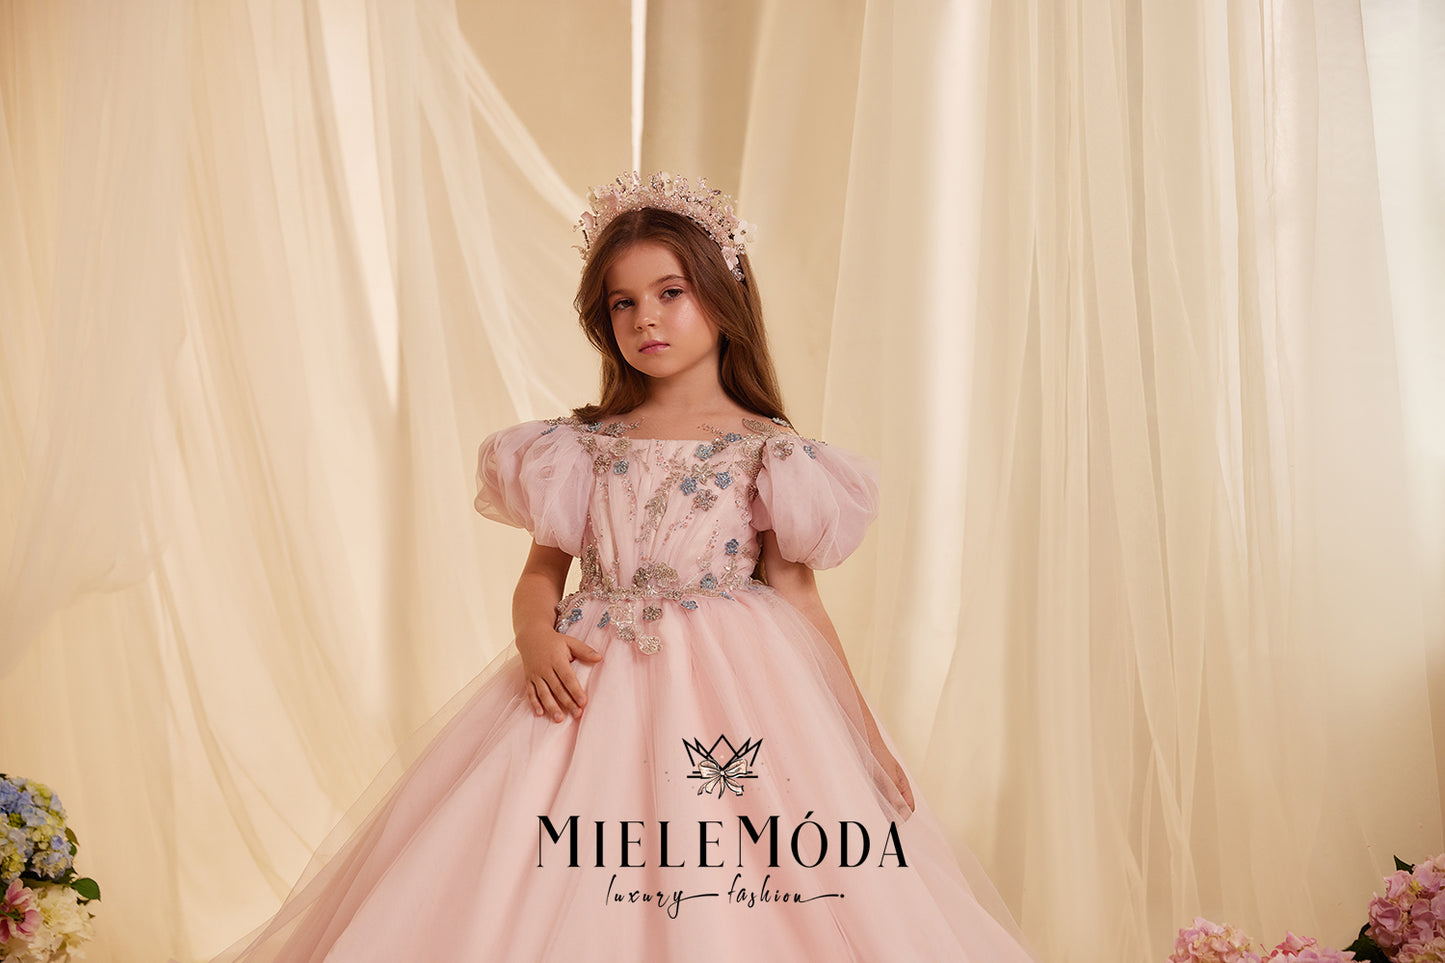 Diantha Luxury Couture Flower Girl Dress